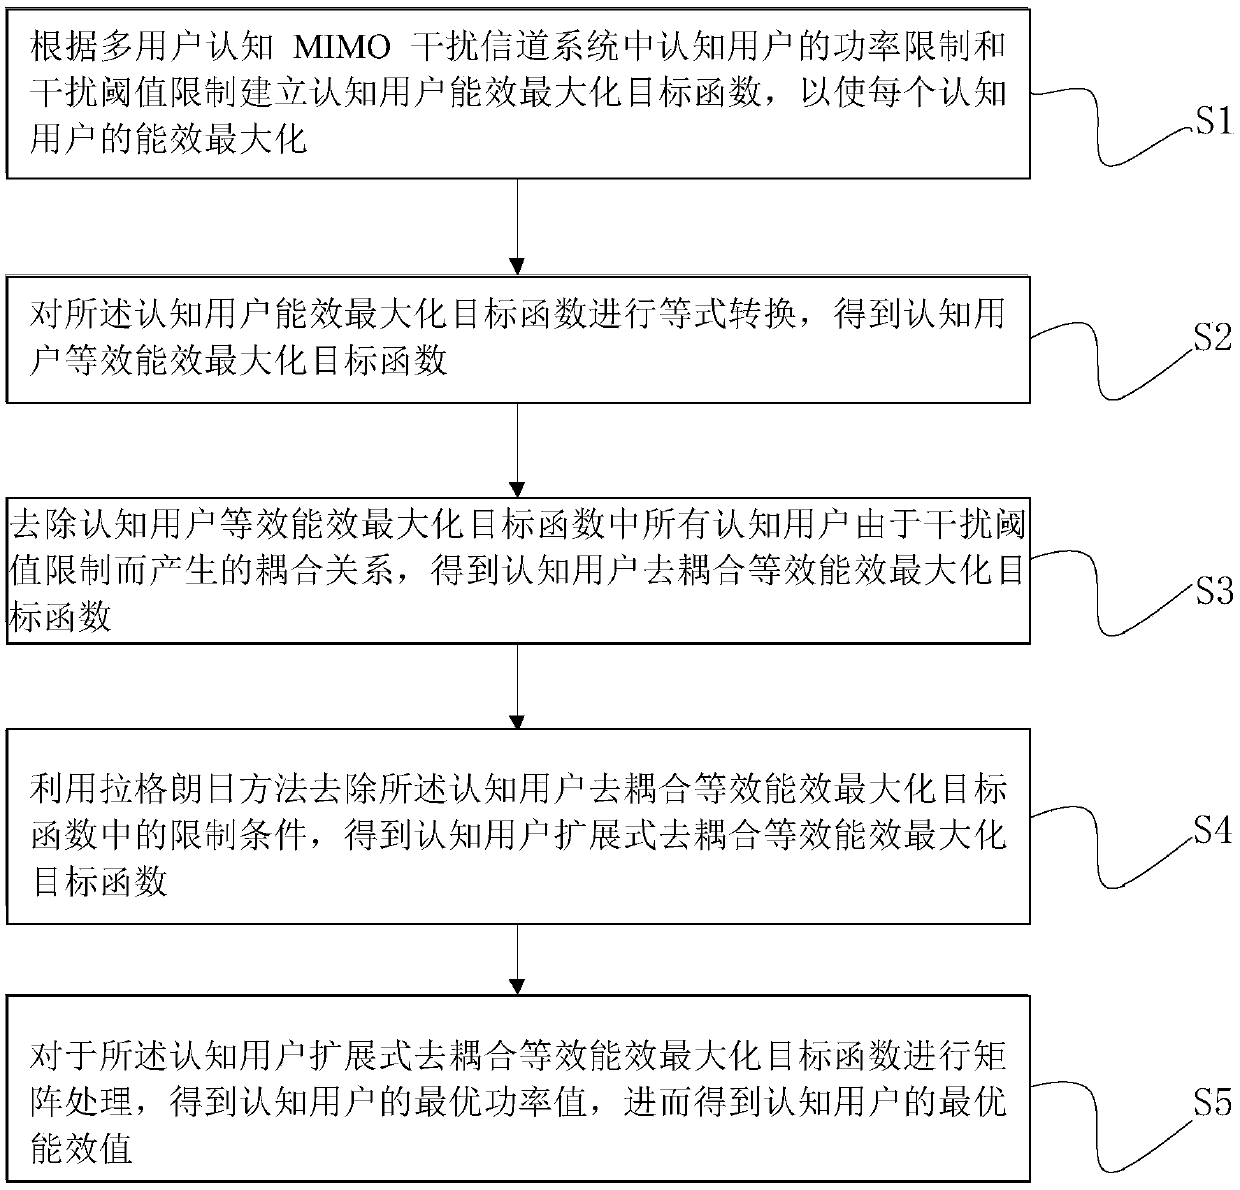 Multi-user cognition MIMO interference channel distributed energy efficiency optimization method